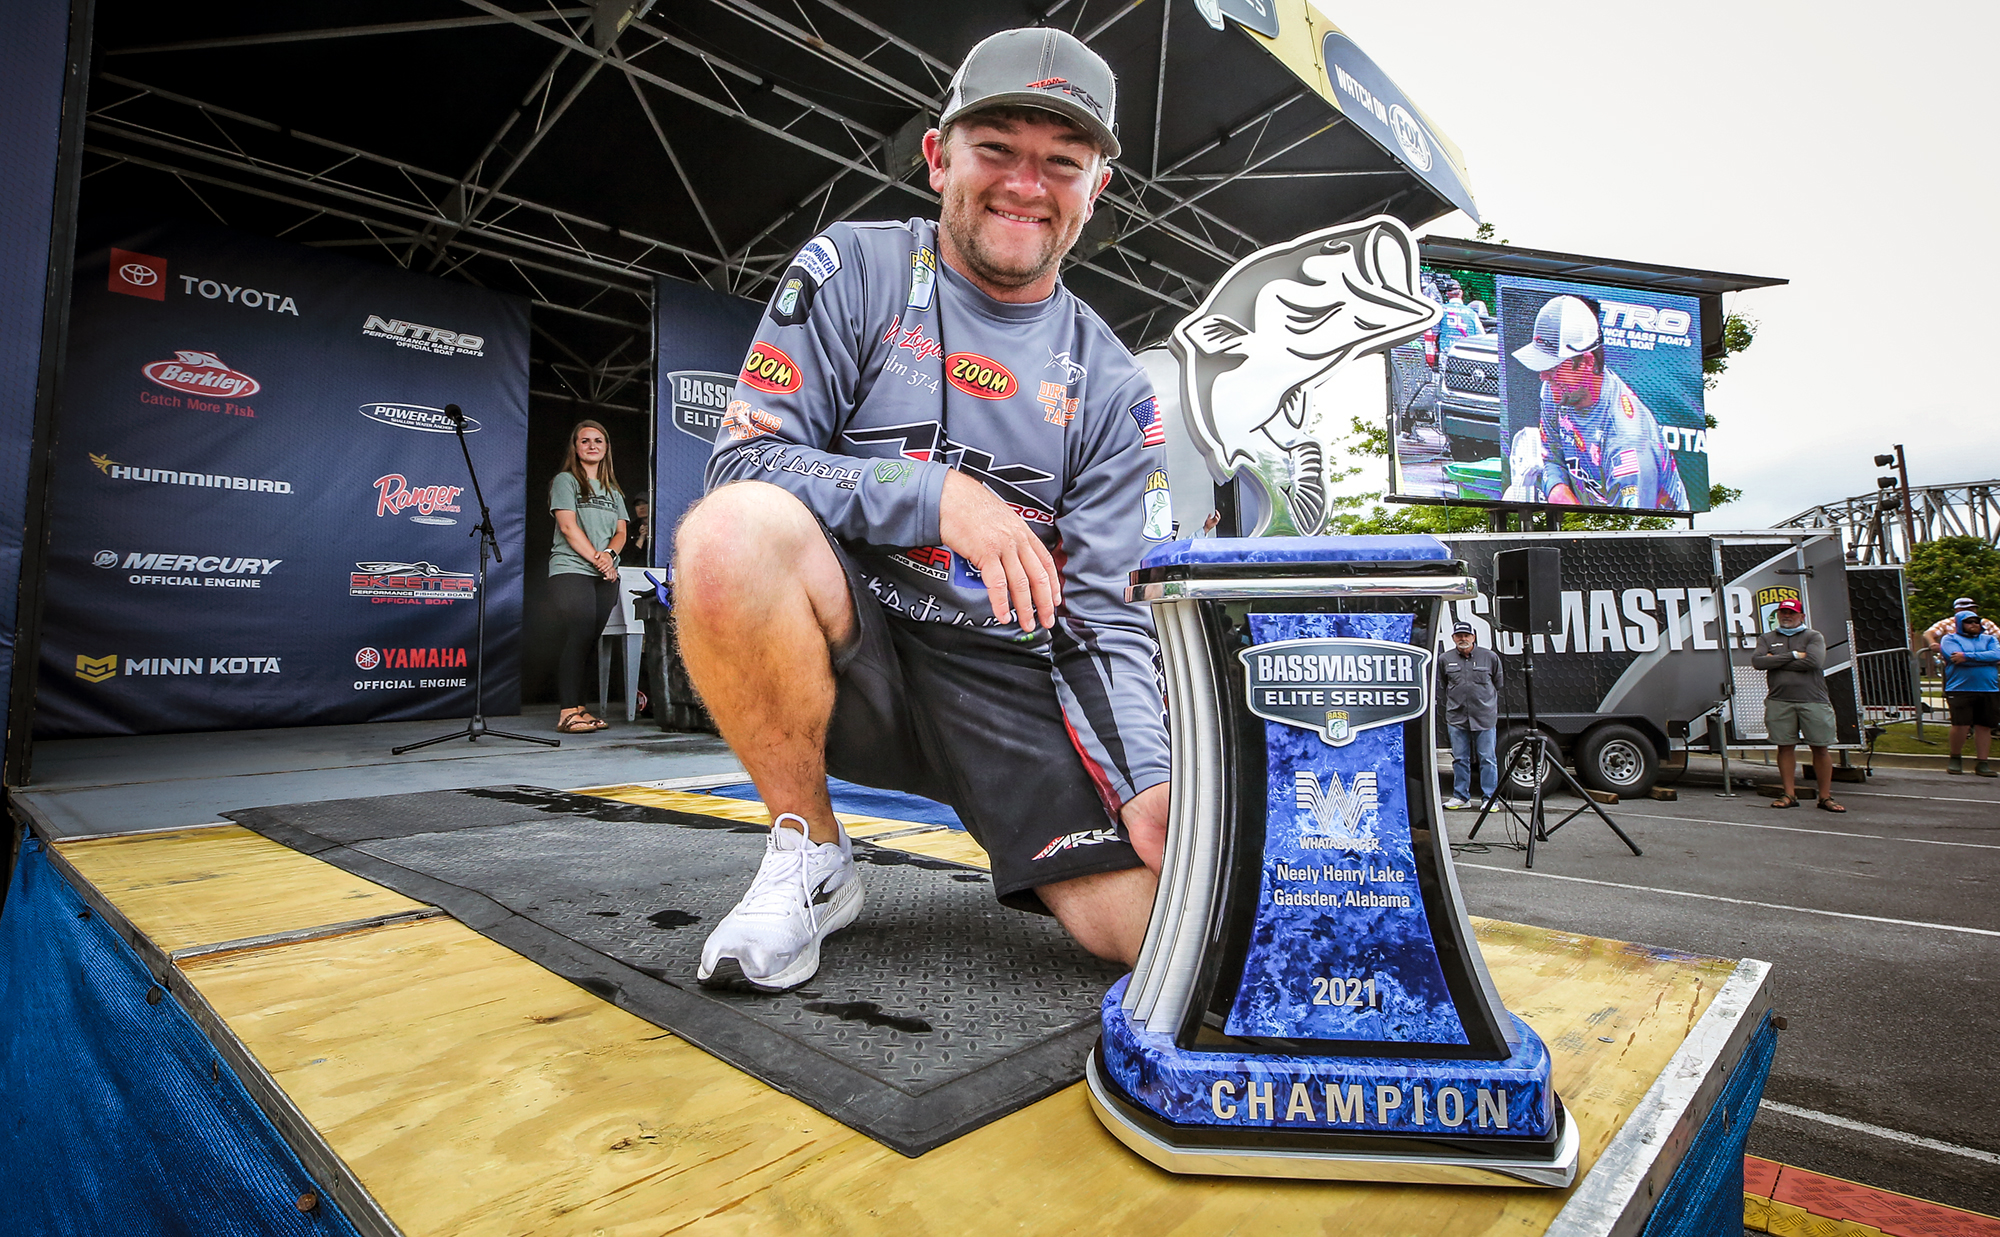 Wes Logan, Local Pro, Gets First Bassmaster Elite Series Victory At Neely Henry Lake